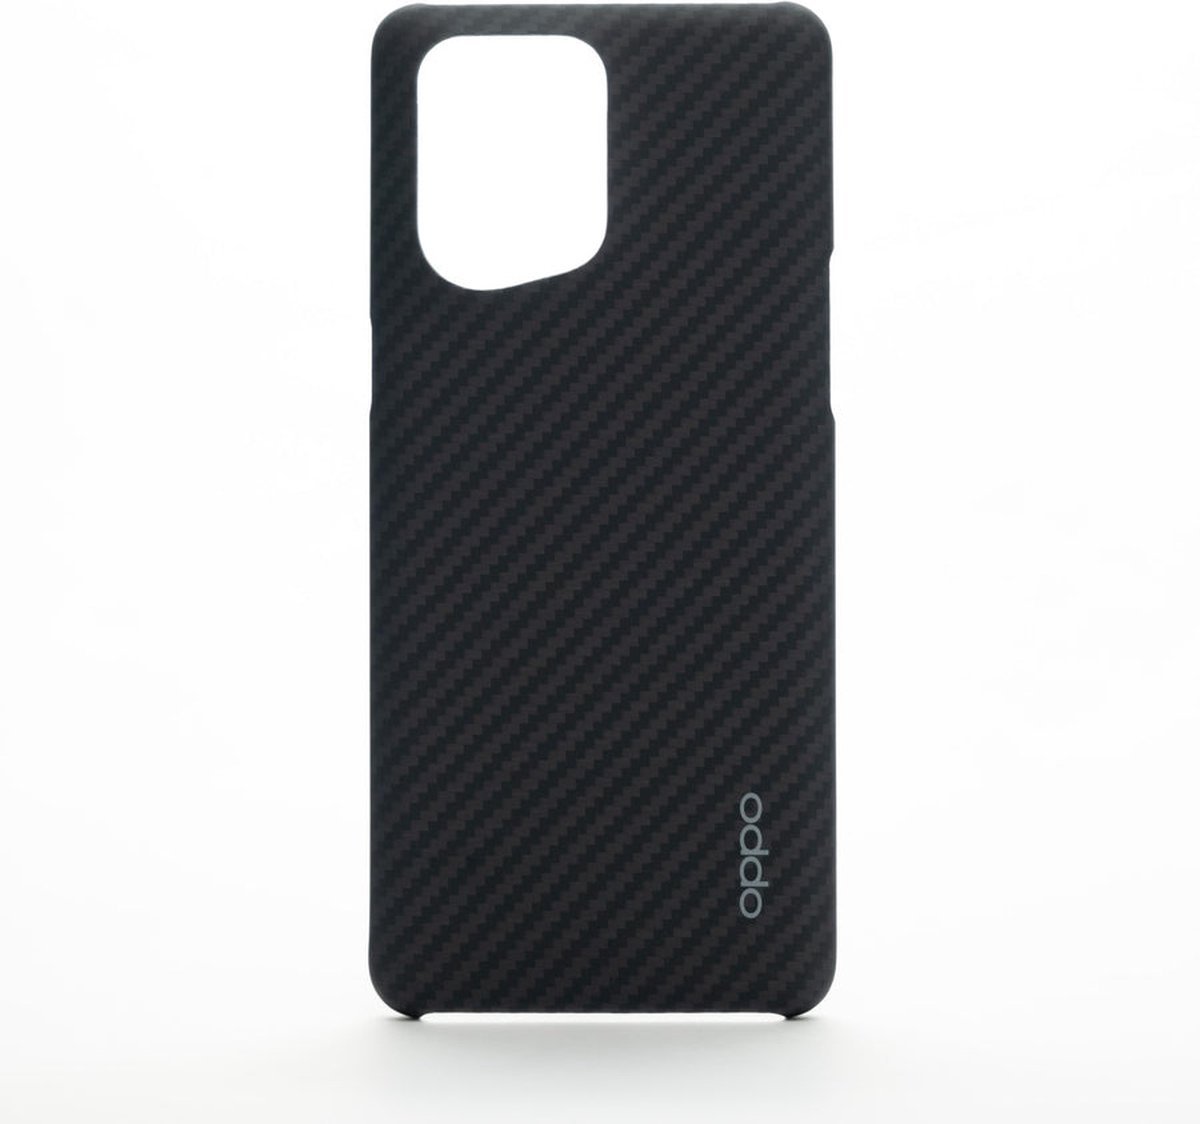 OPPO Find X5 Pro Protective case